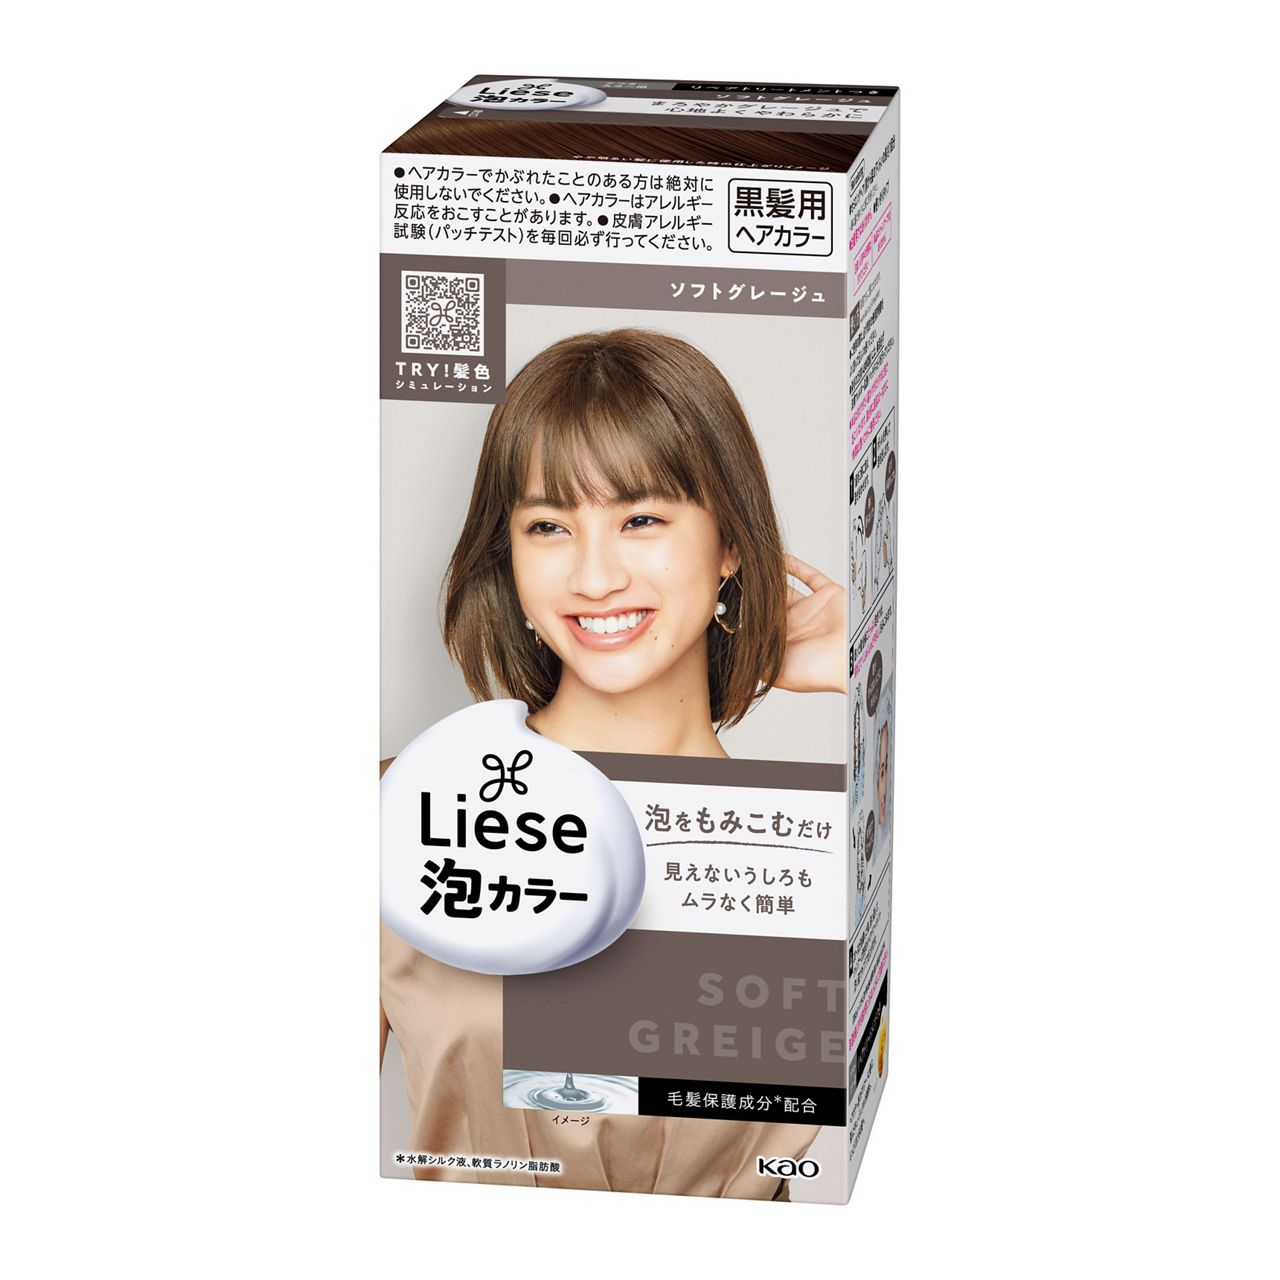 Liese Kao Bubble Hair Color Prettia - Soft Greige - Harajuku Culture Japan - Japanease Products Store Beauty and Stationery